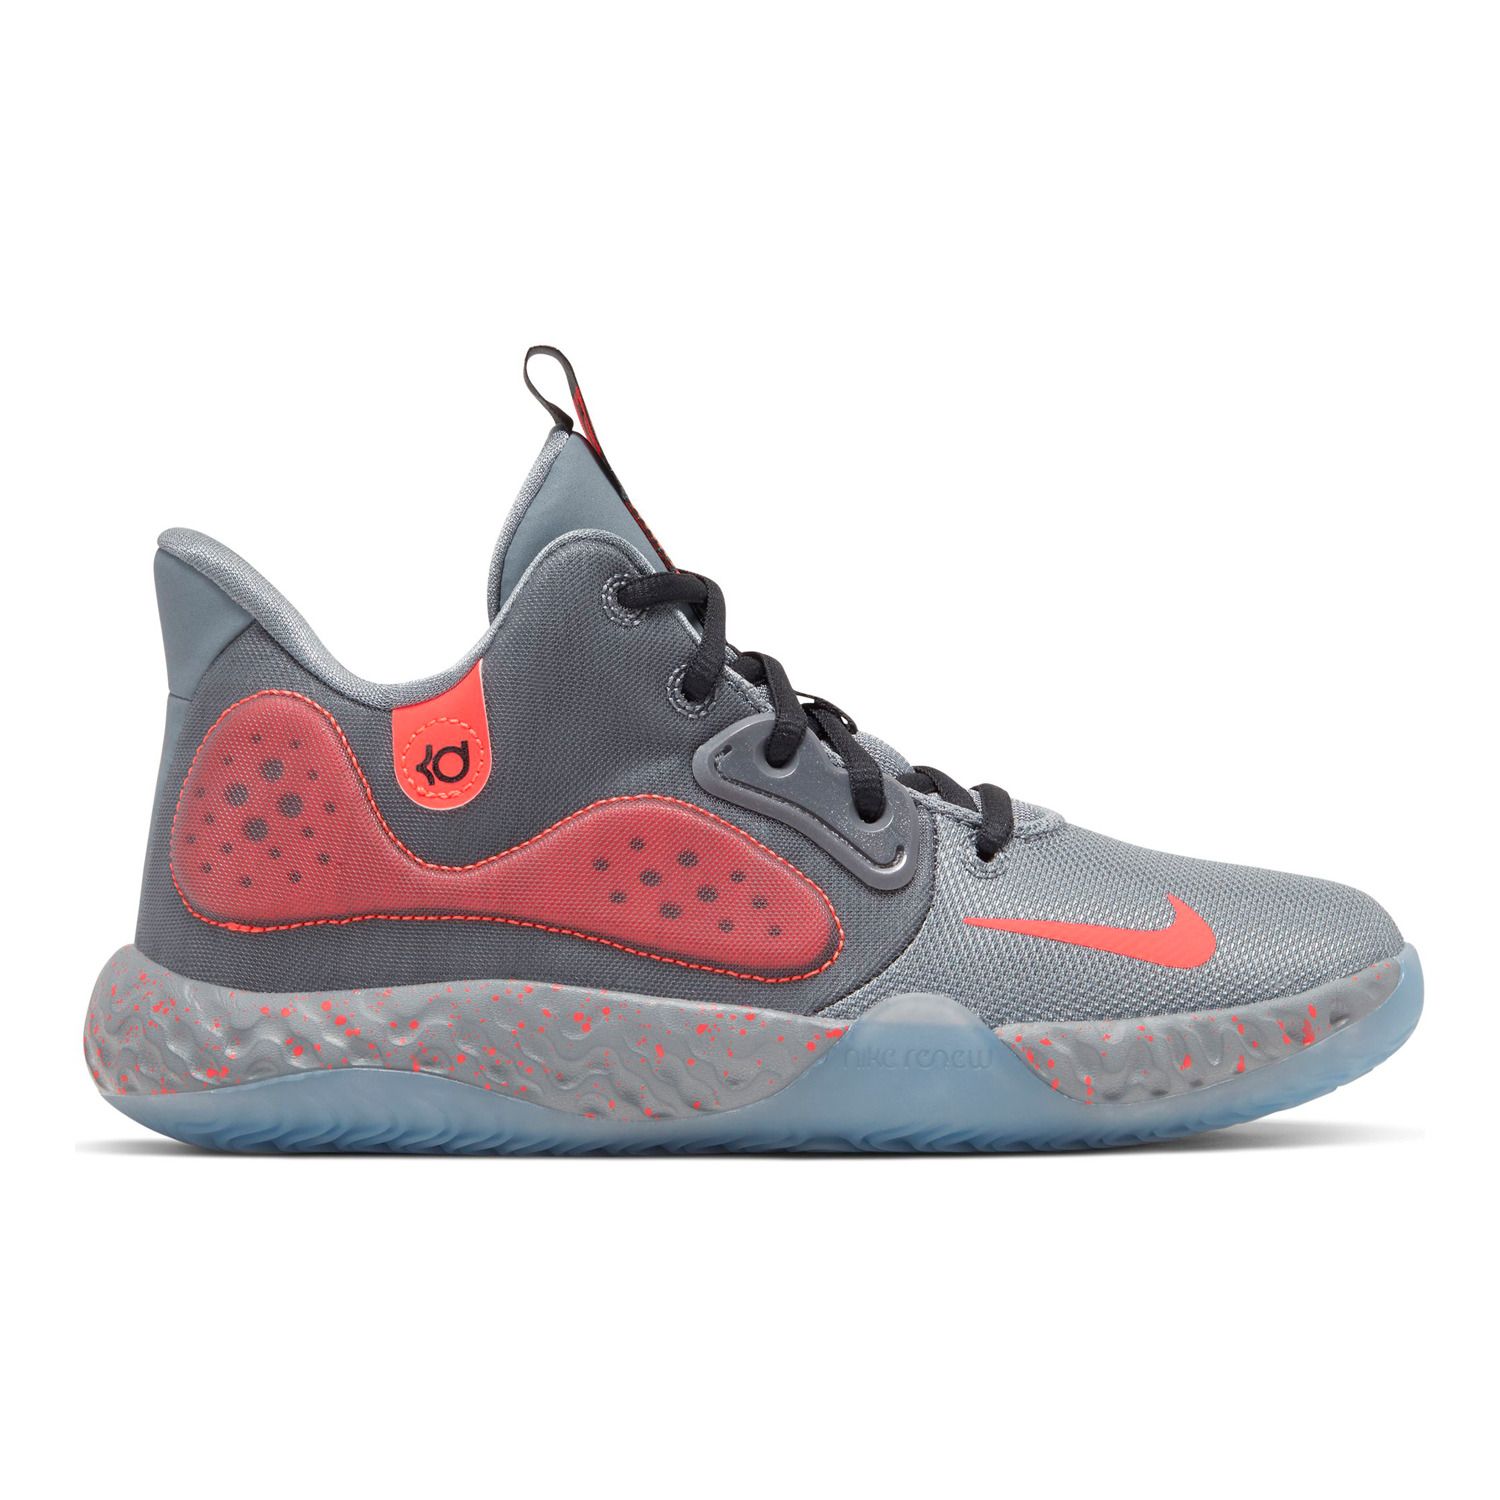 are kd trey 5 good basketball shoes